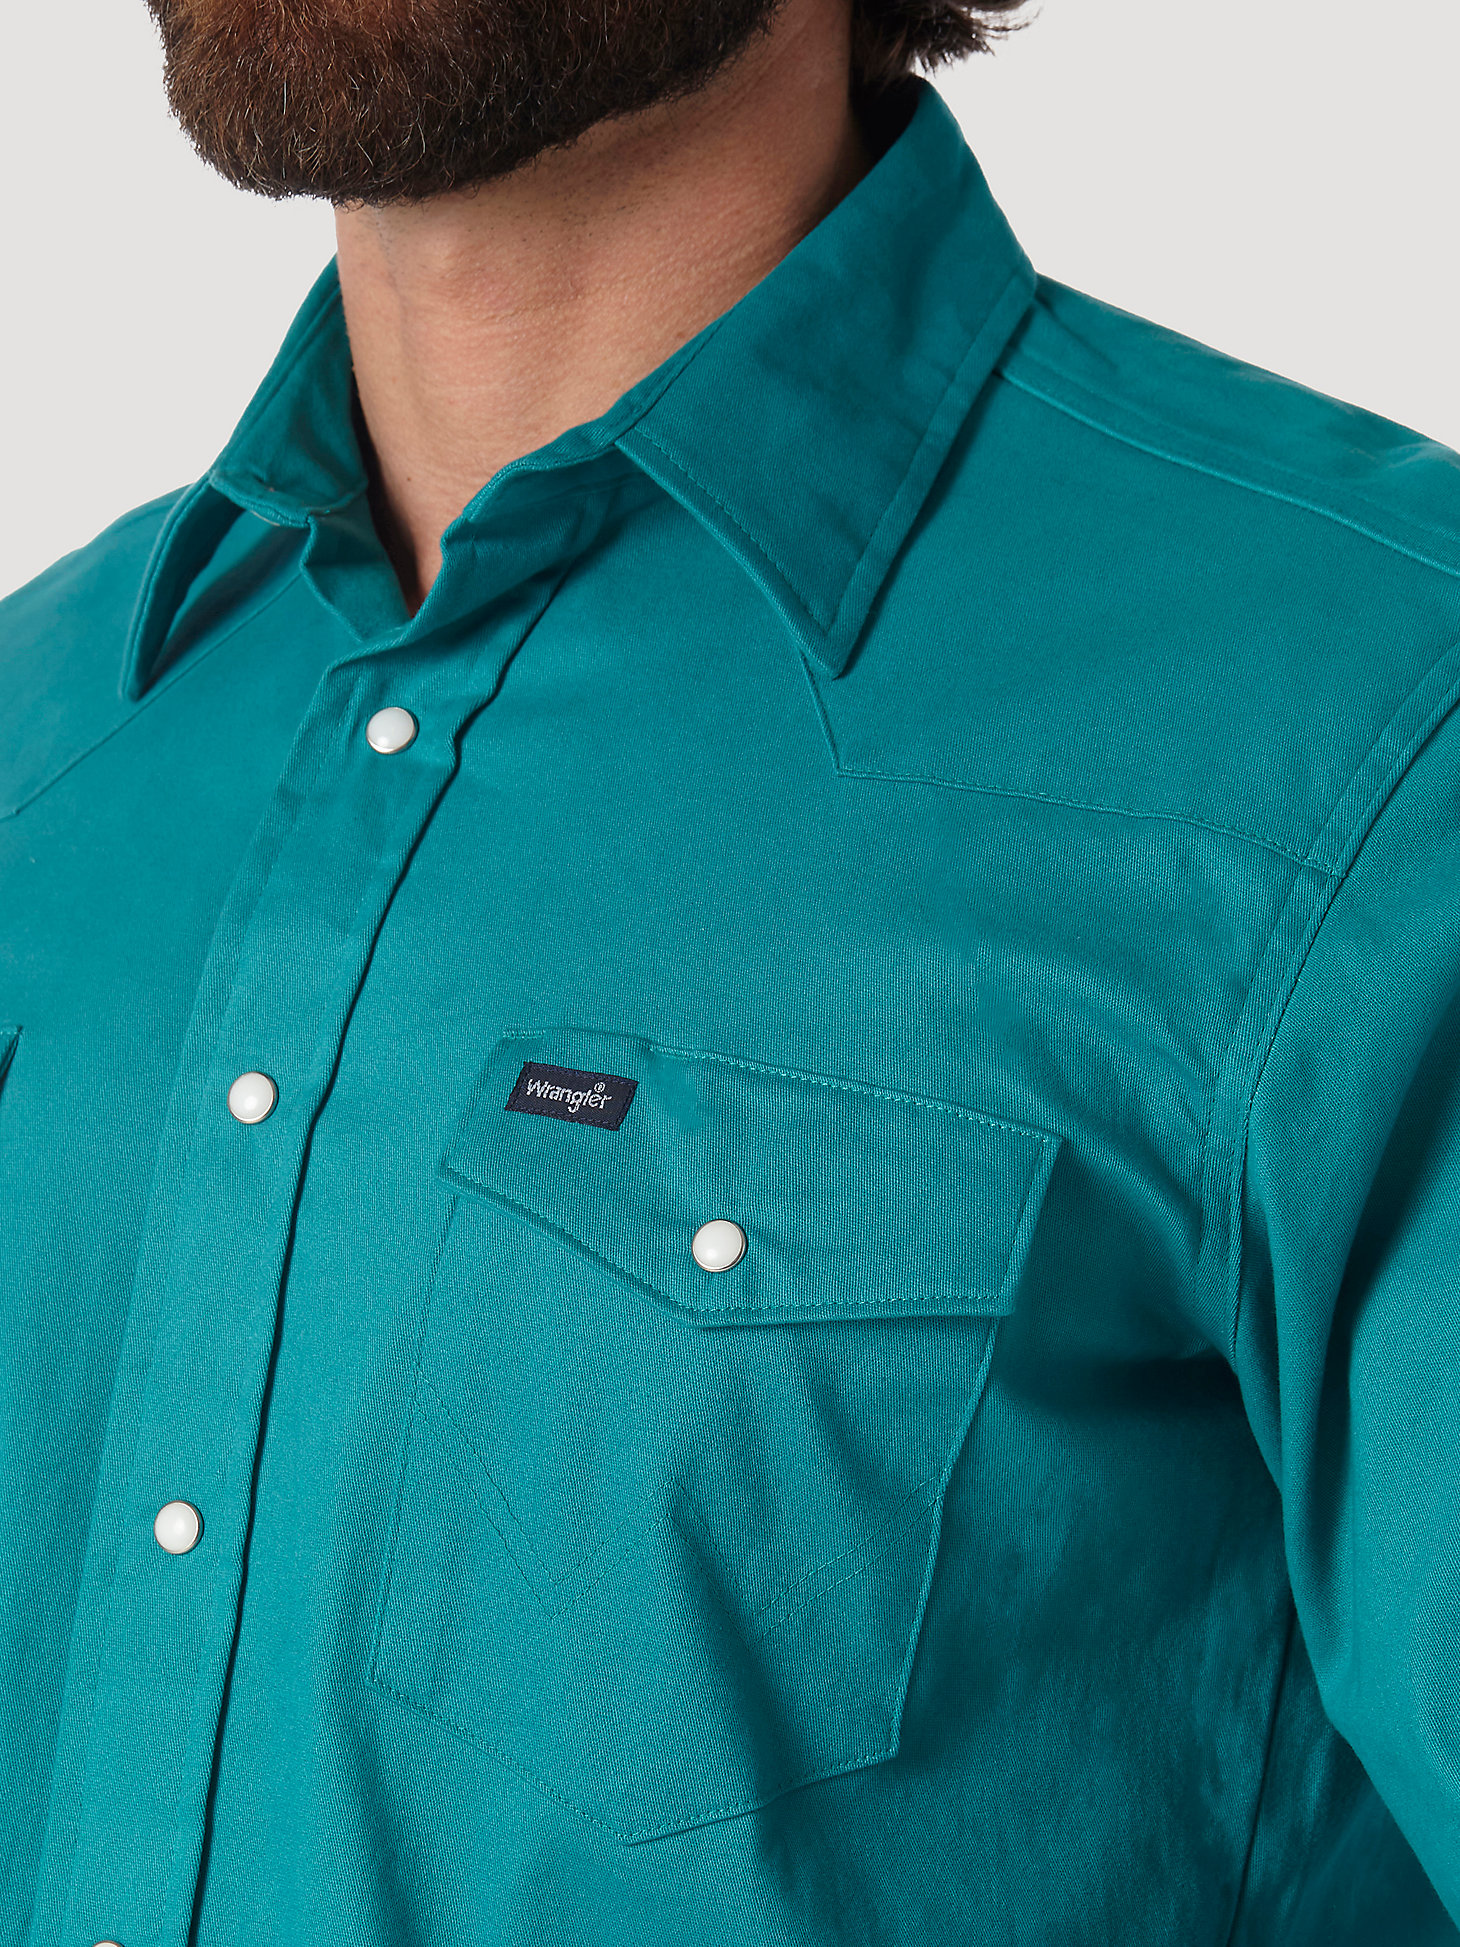 Premium Performance Advanced Comfort Cowboy Cut® Long Sleeve Spread Collar Solid Shirt in Turquoise alternative view 3